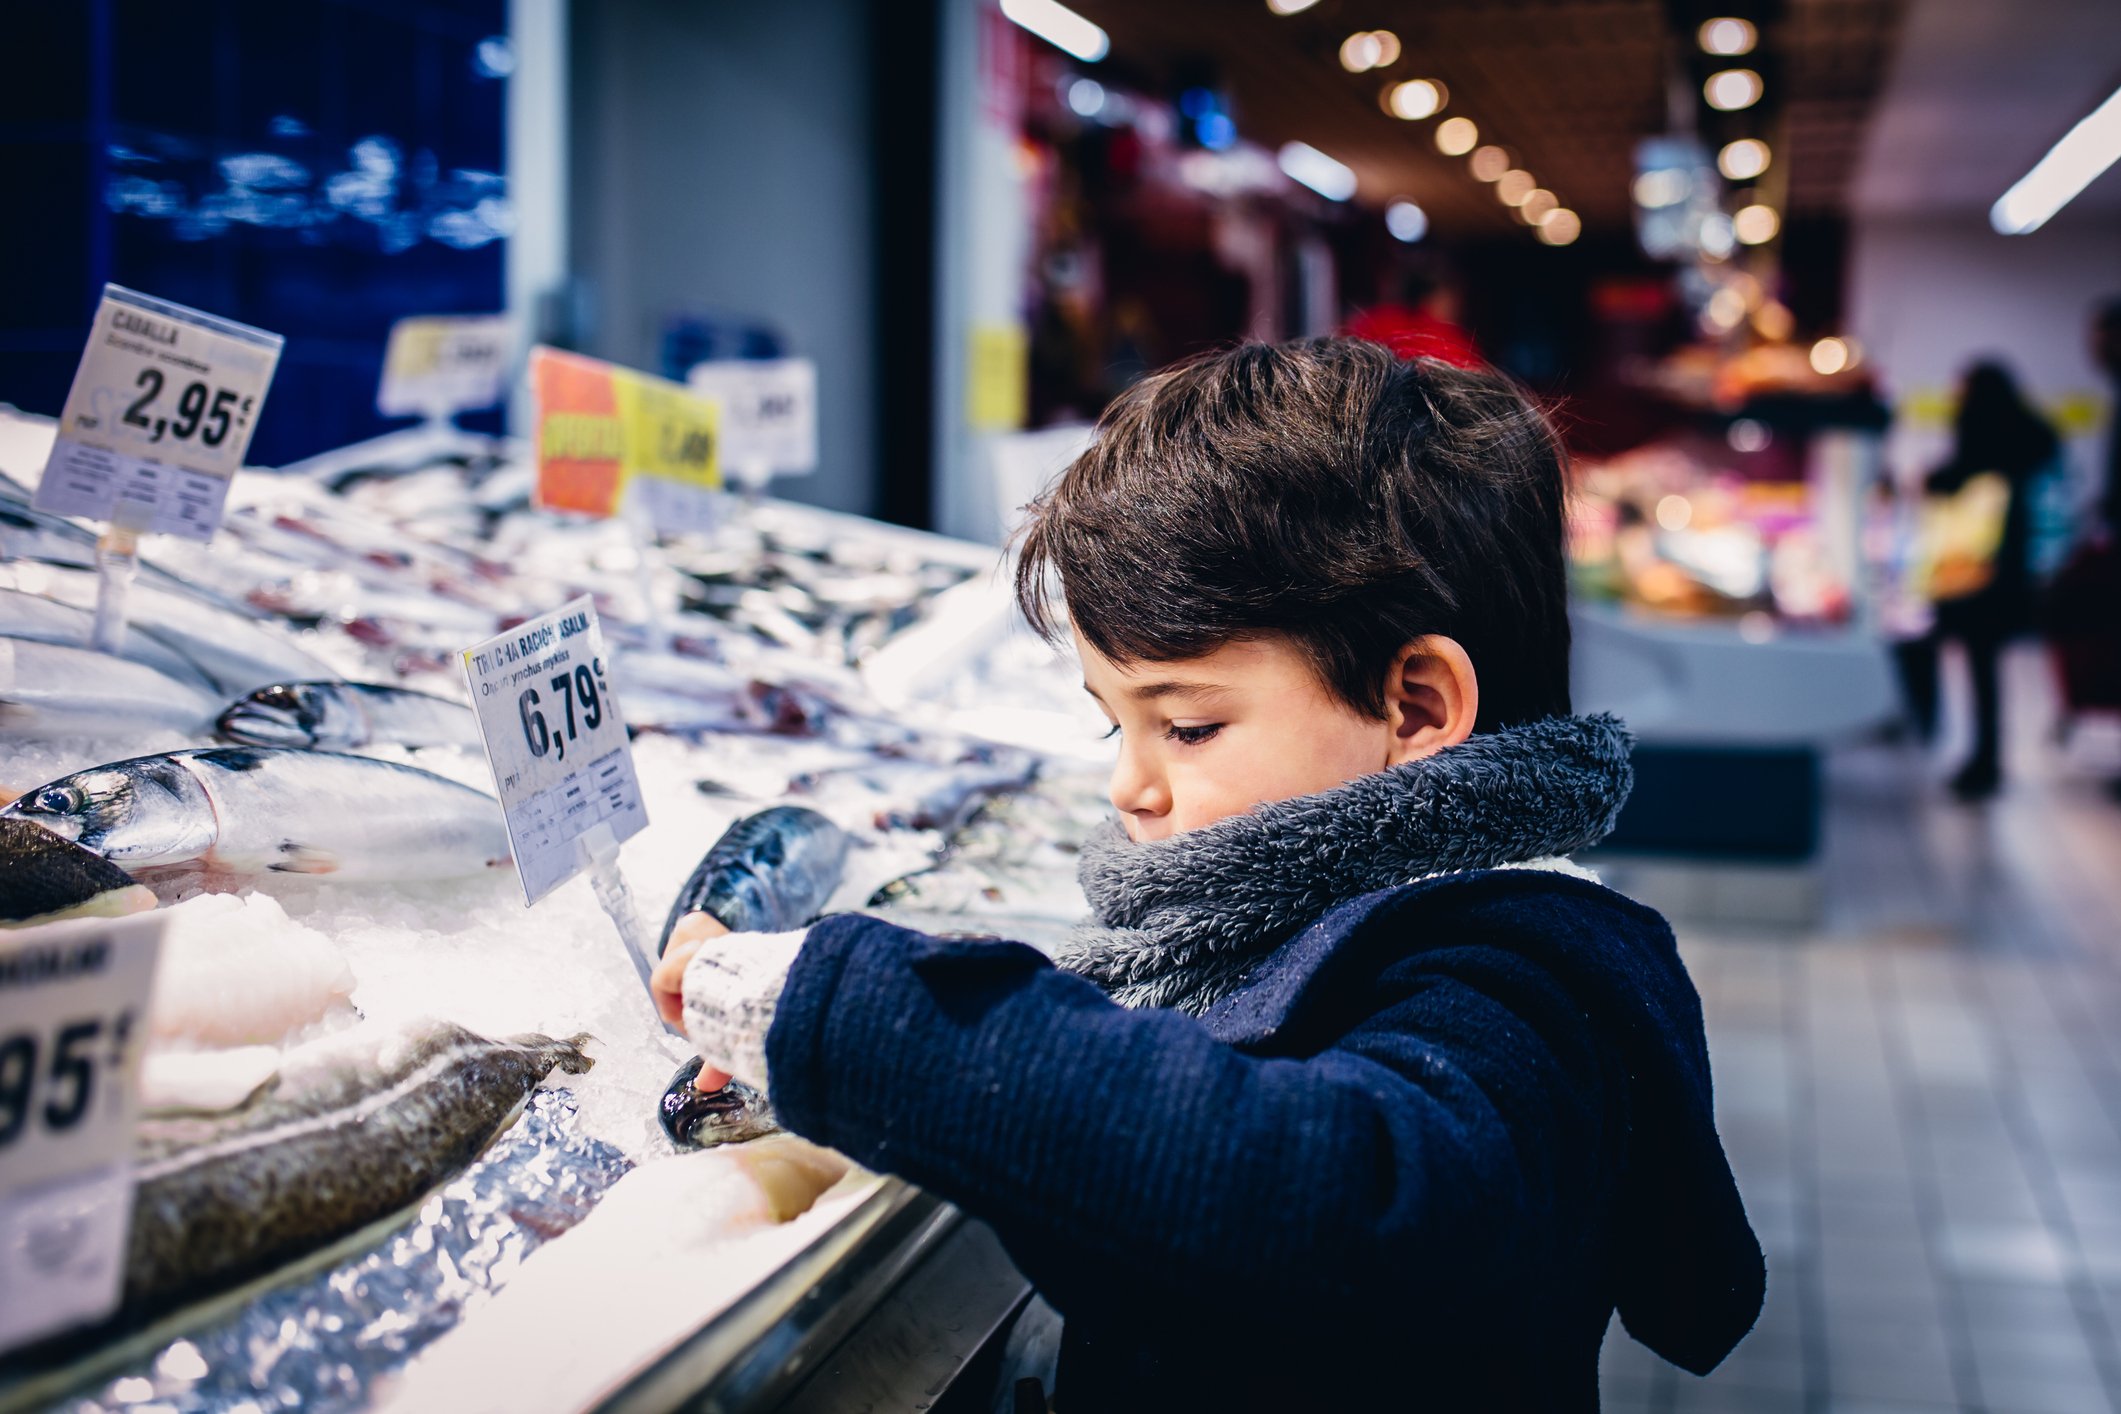 Boy observing goods in store| Photo: Getty Images